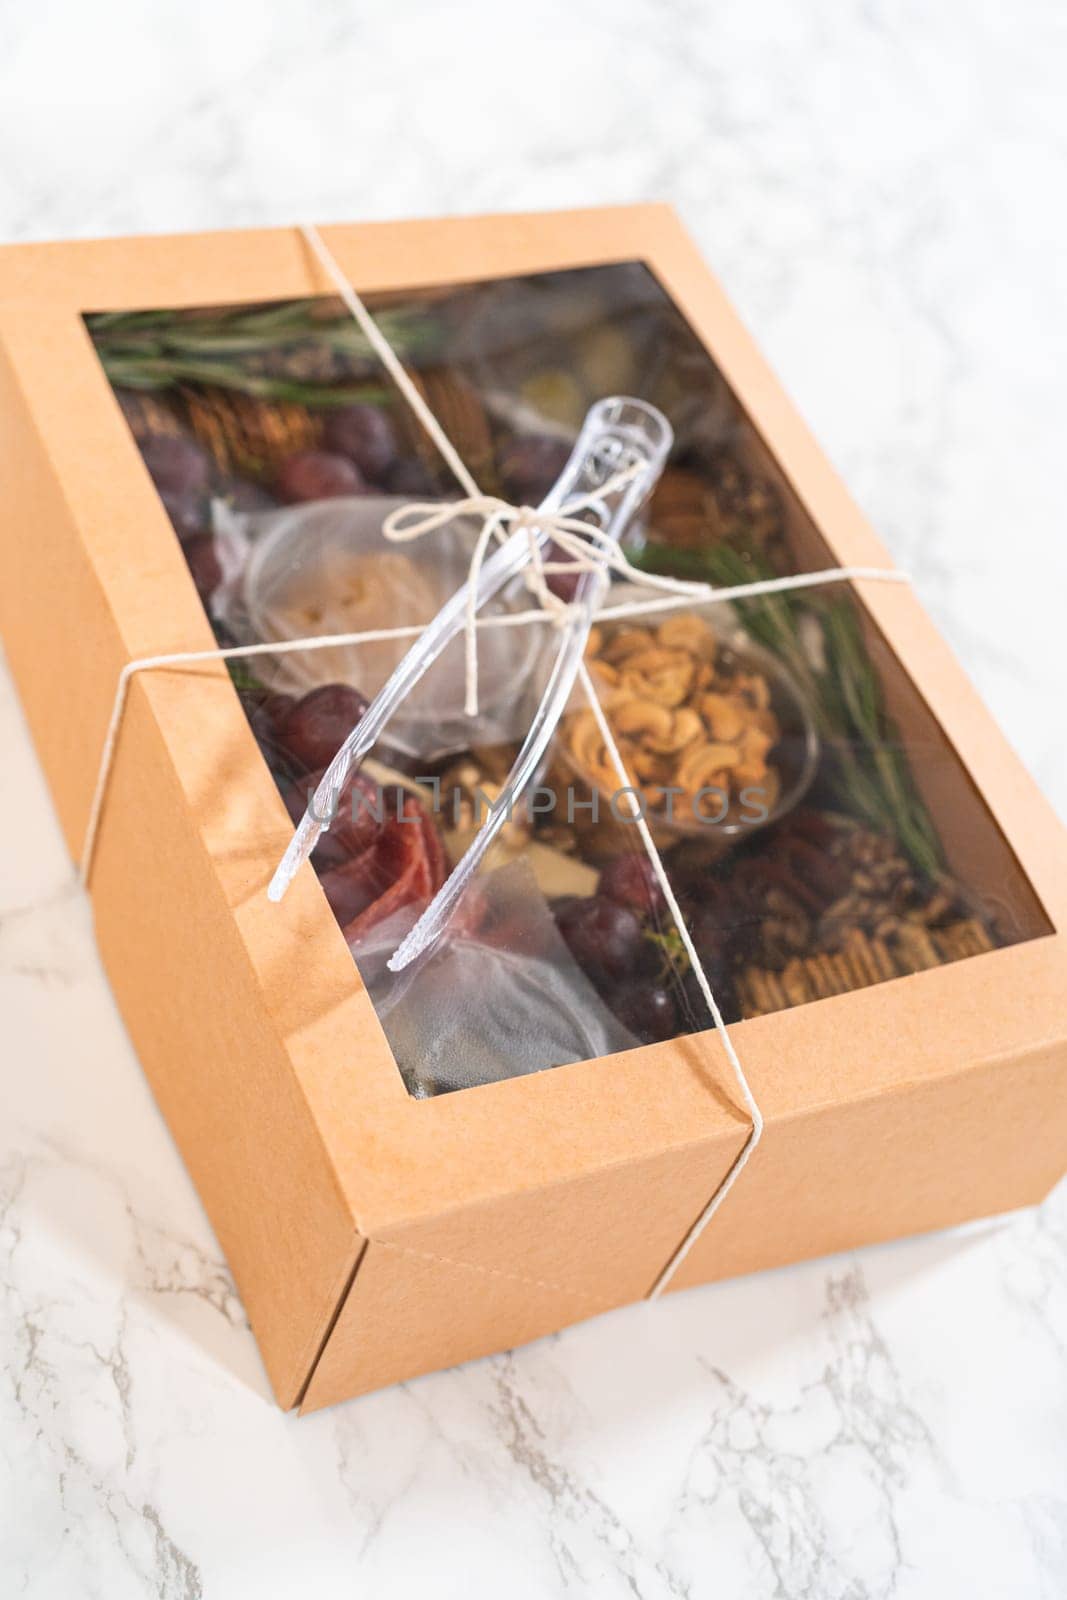 Charcuterie Box-A Delicious Assortment in Gifting Box by arinahabich